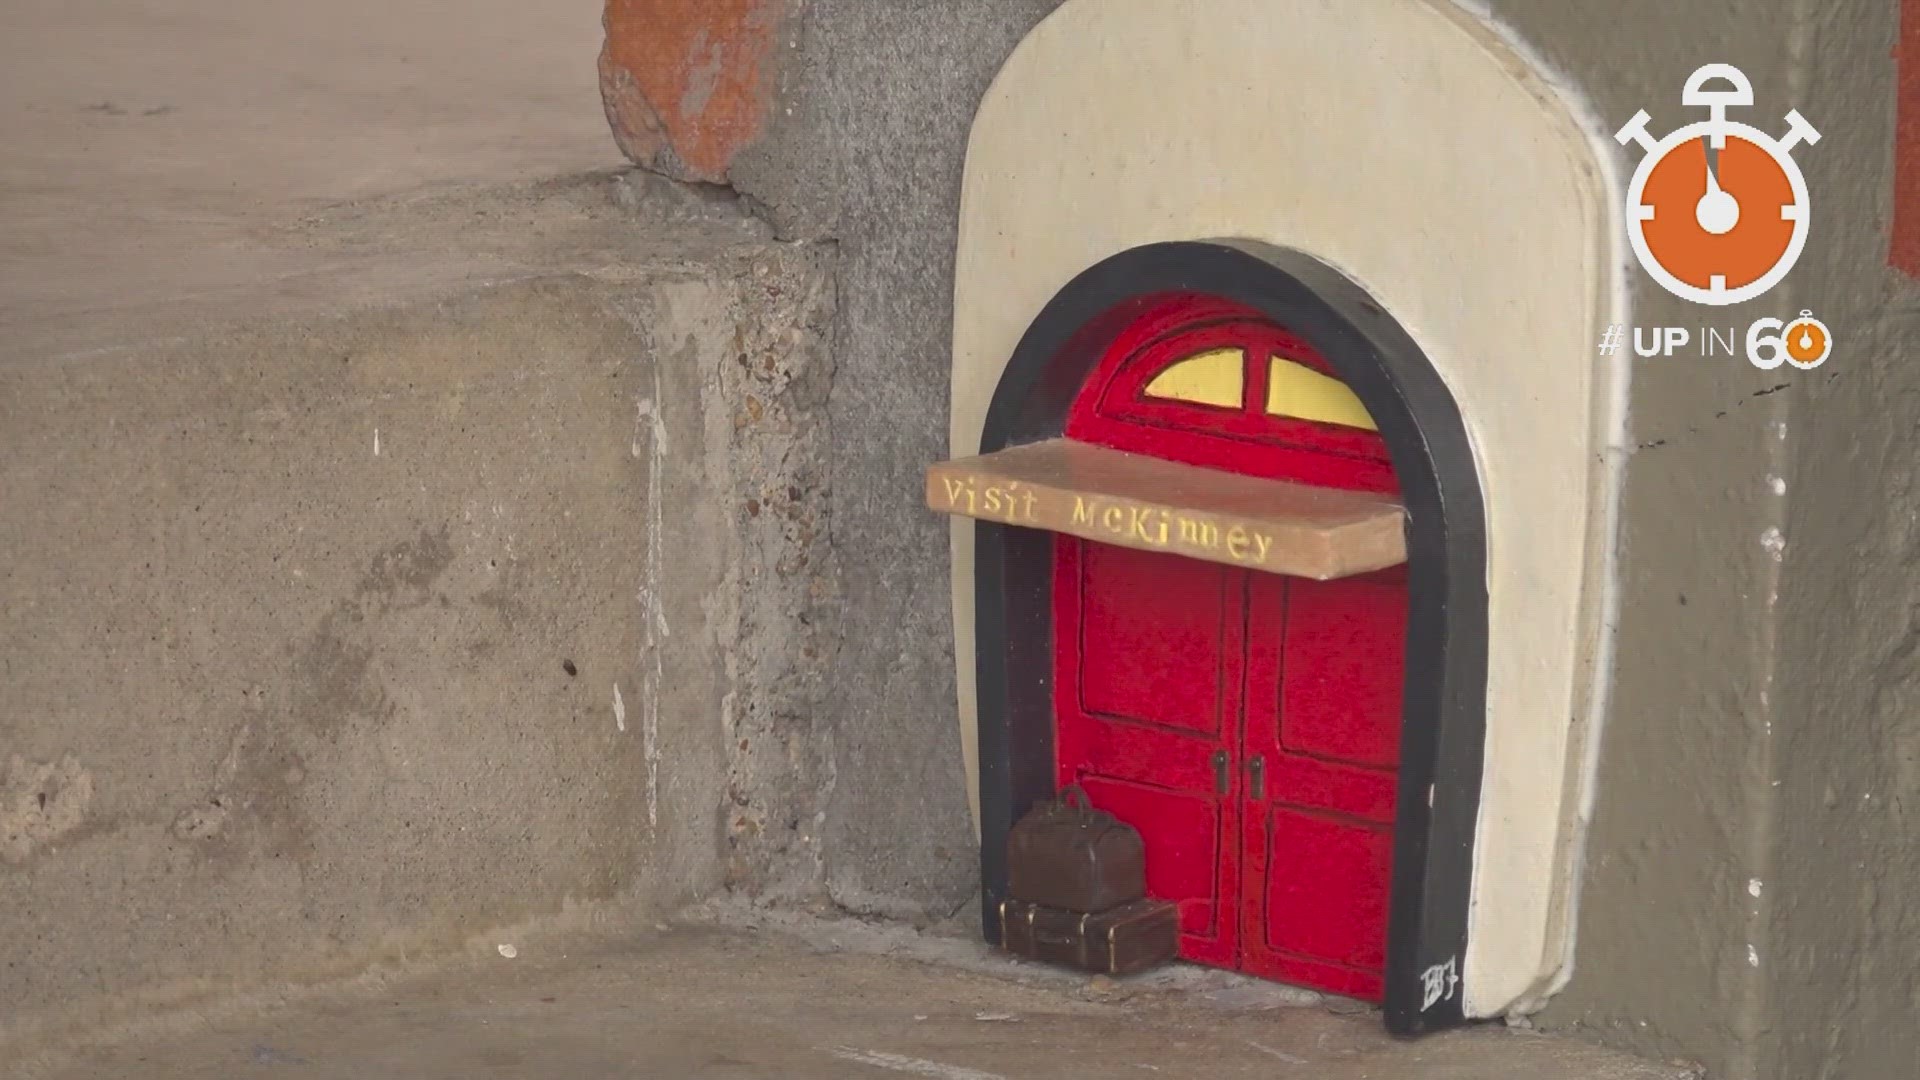 he city installed more than 50 tiny doors as part of a public art project